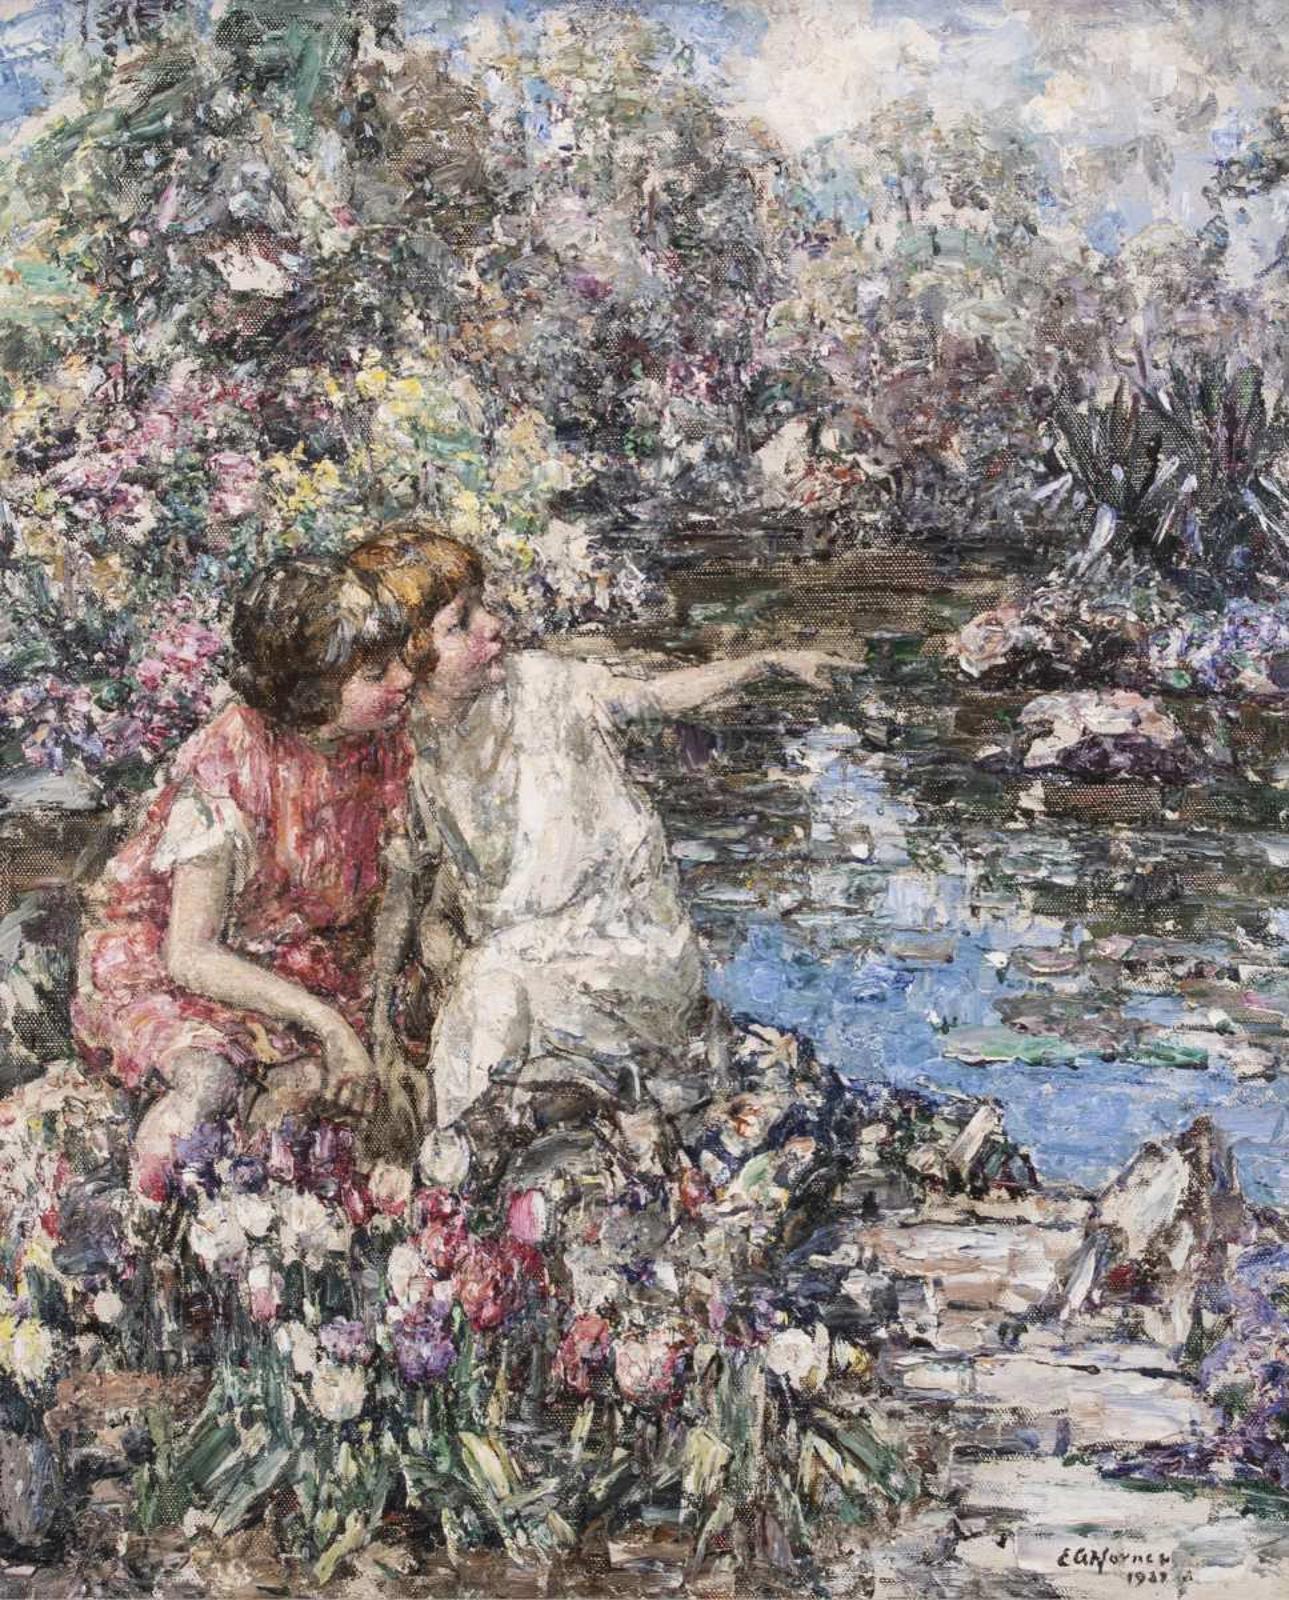 Edward Atkinson Hornel (1864-1933) - Two Girls Seated By Tulips And Overlooking A Lily Pond; 1927